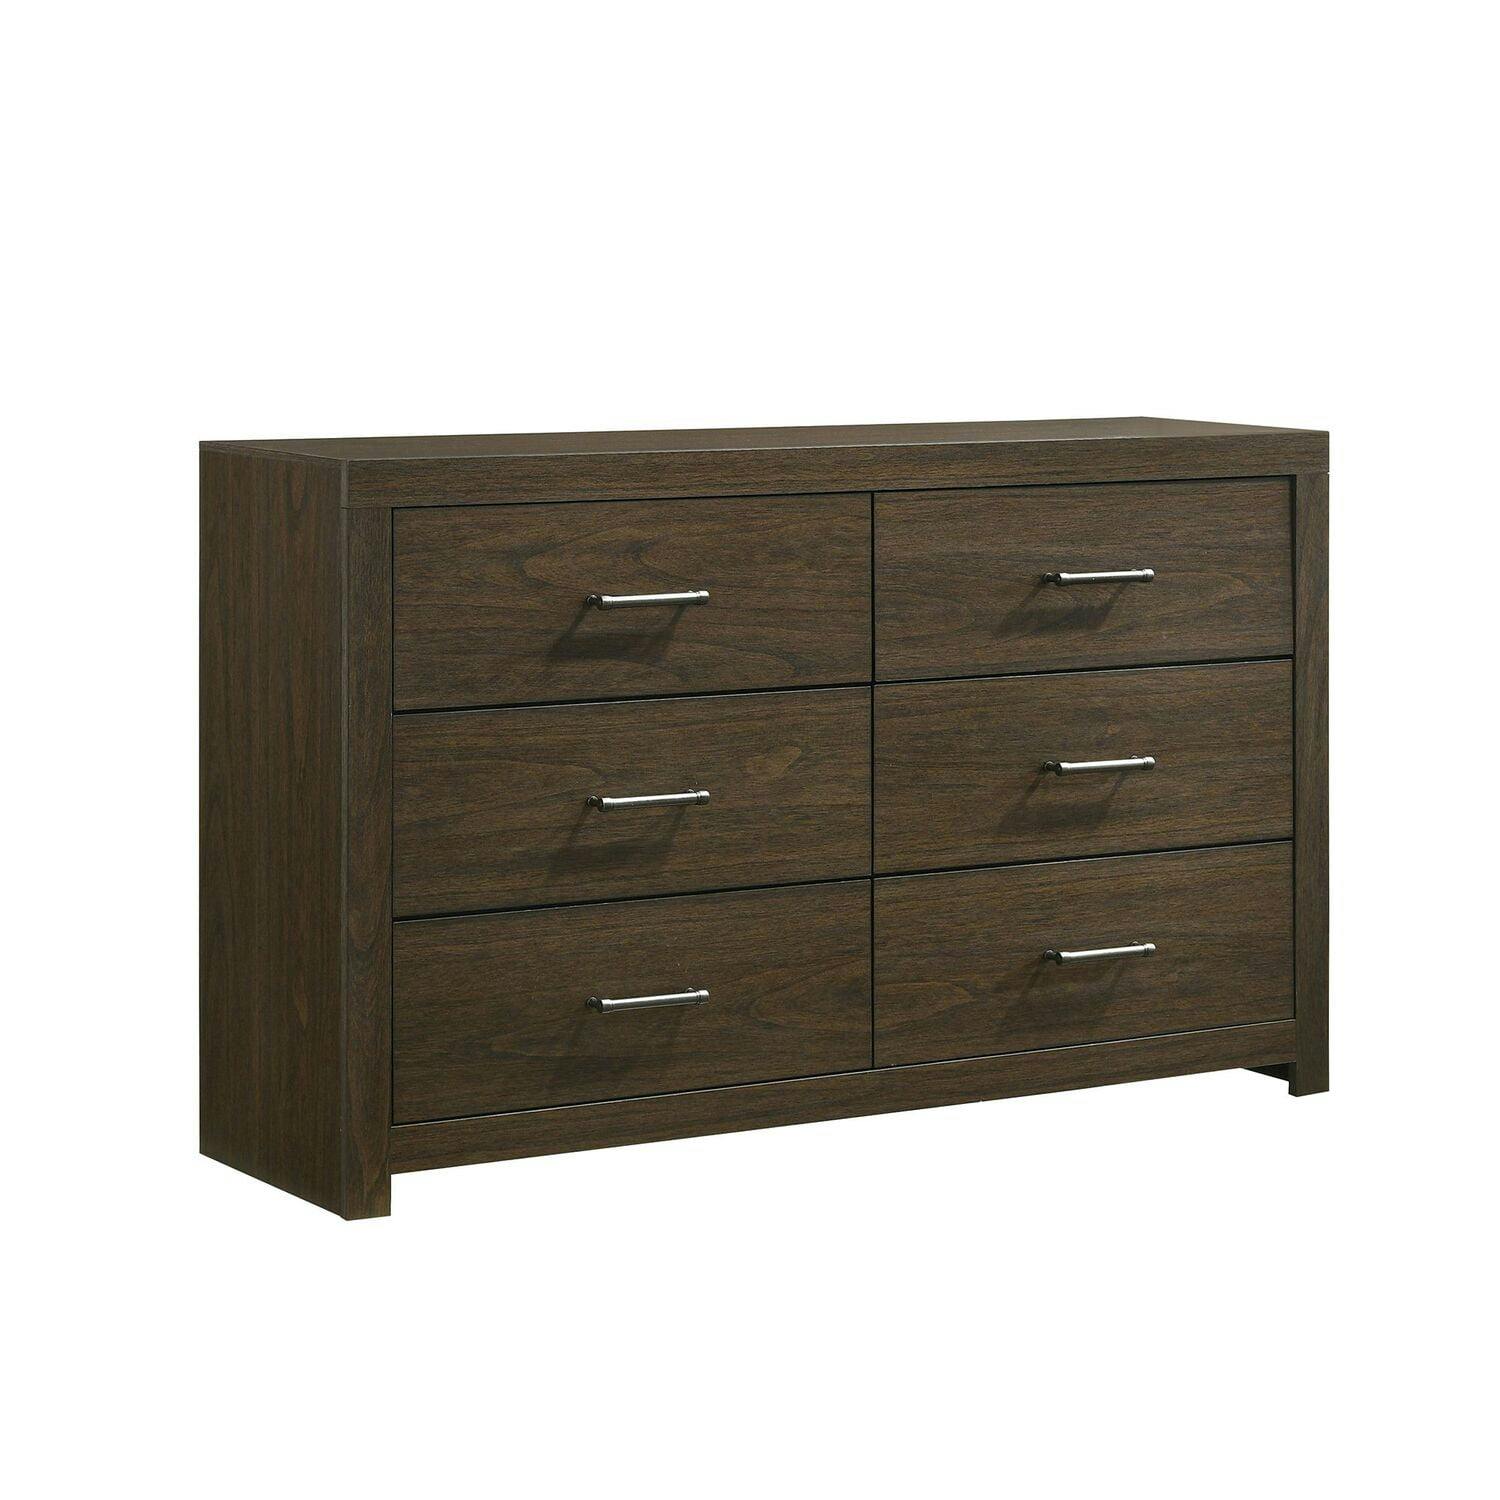 Rustic Hendrix Double Dresser with Mirror and Felt-Lined Drawers